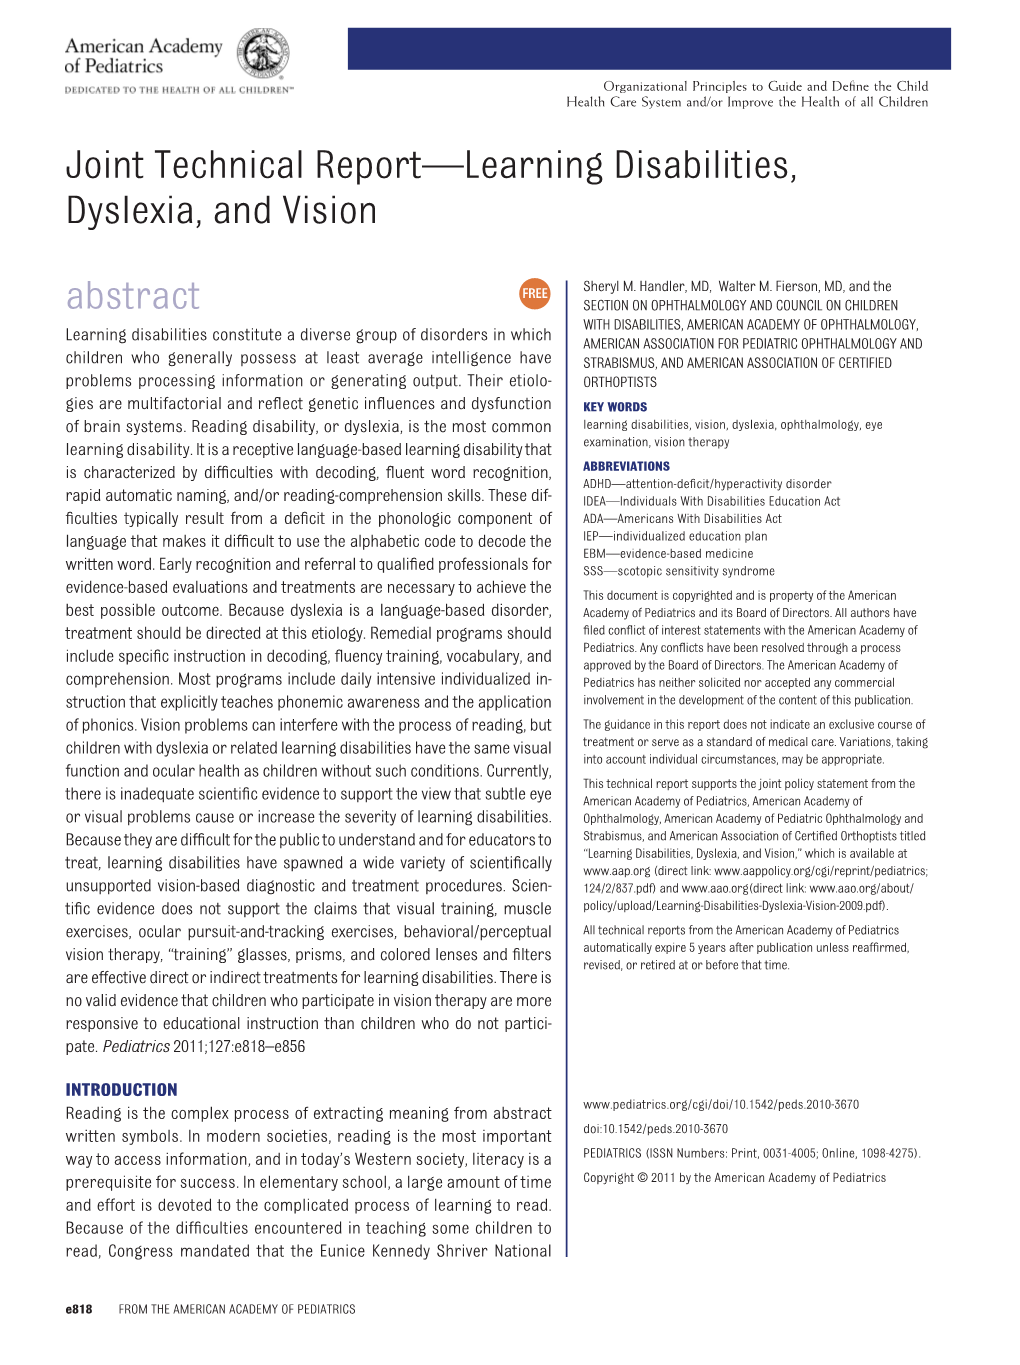 Joint Technical Report—Learning Disabilities, Dyslexia, and Vision